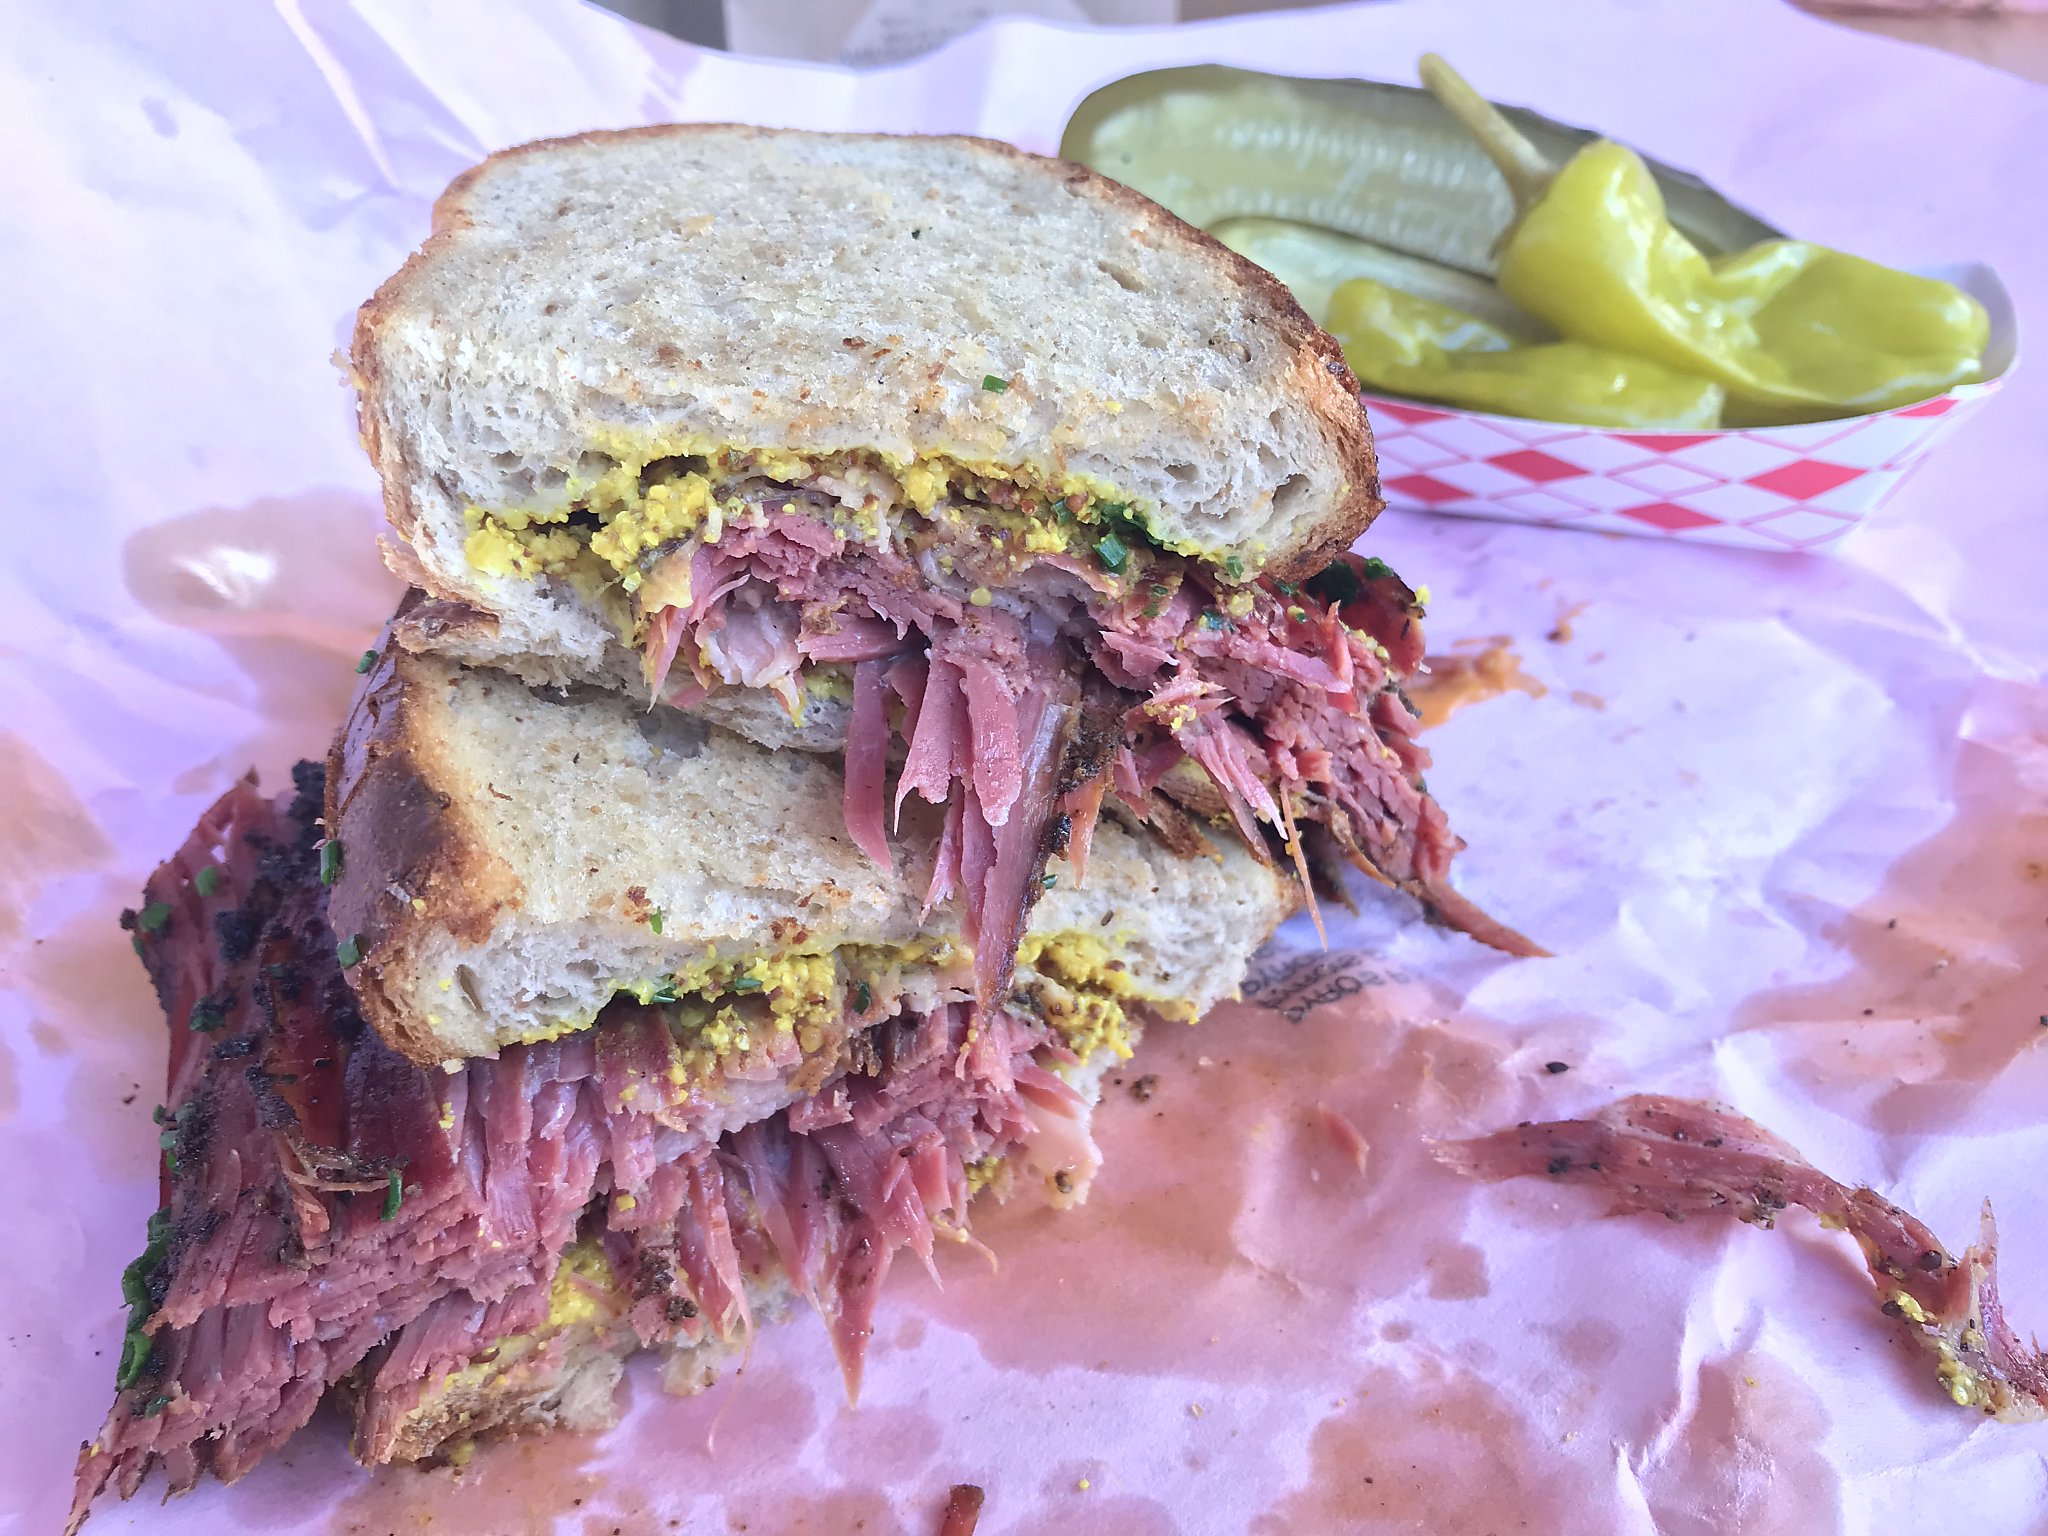 Meet Pyro's Pastrami, a new Oakland pop-up selling out of its beefy and  vegan sandwiches weekly